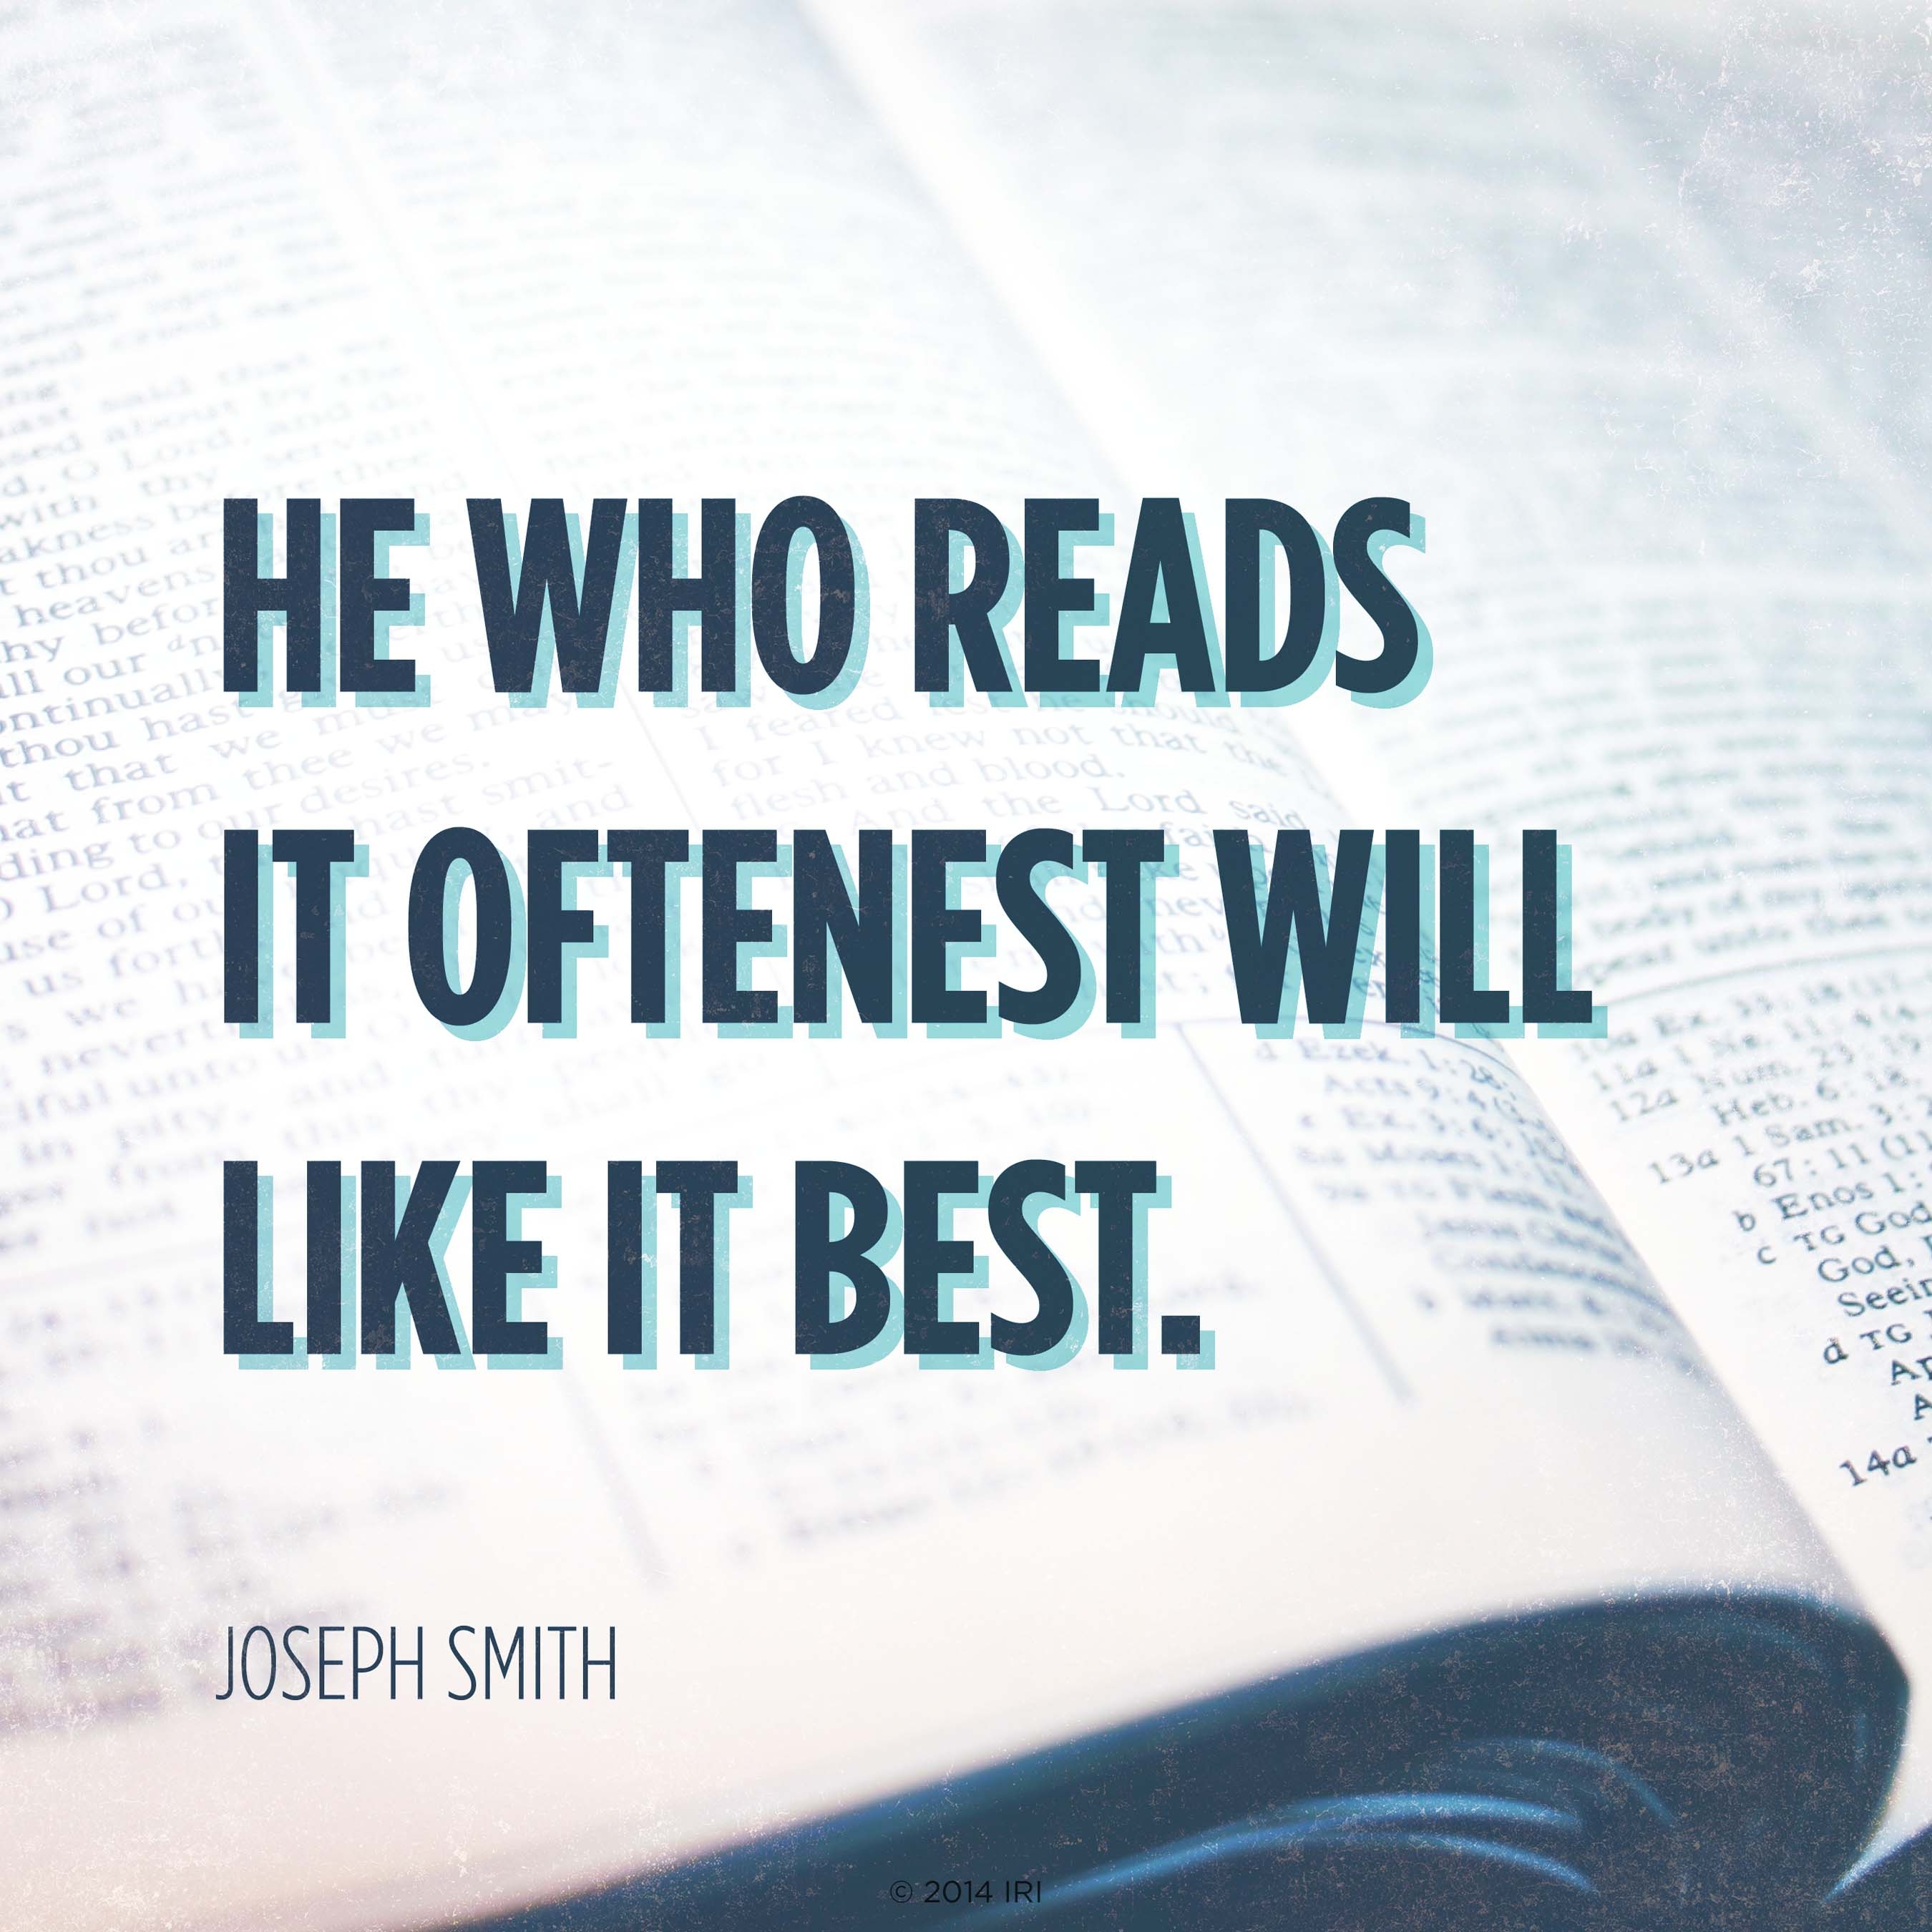 A close-up photograph of open scriptures paired with words from Joseph Smith: “He who reads it oftenest will like it best.”